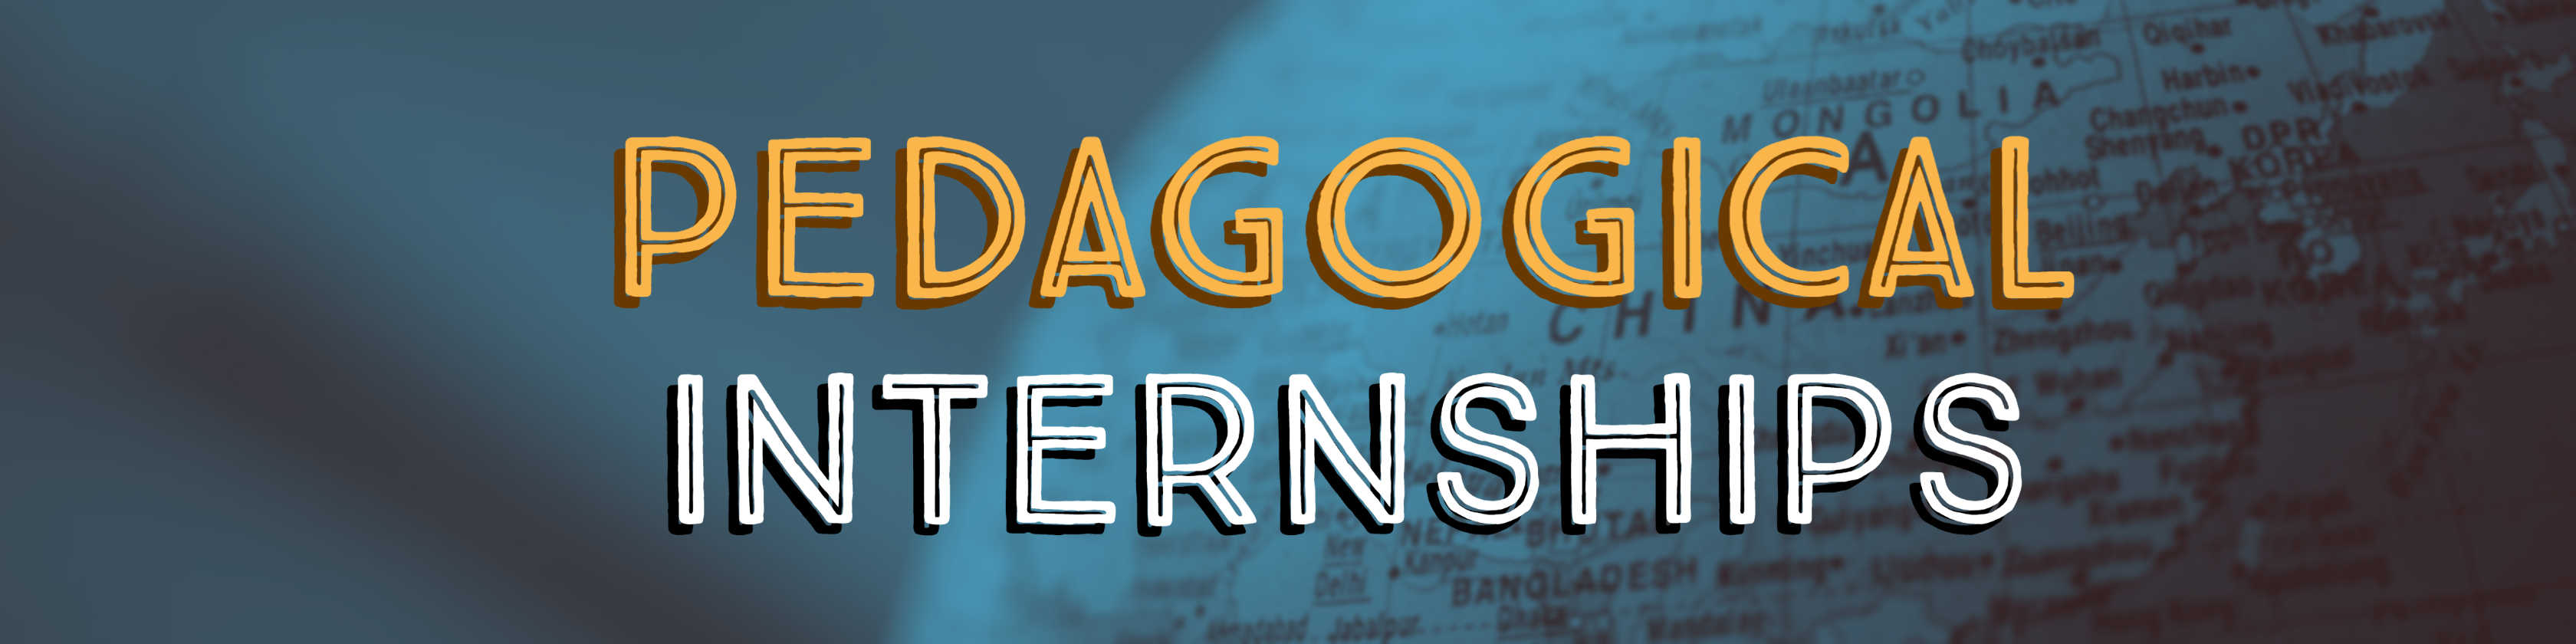 Image banner with text Pedagogical internships